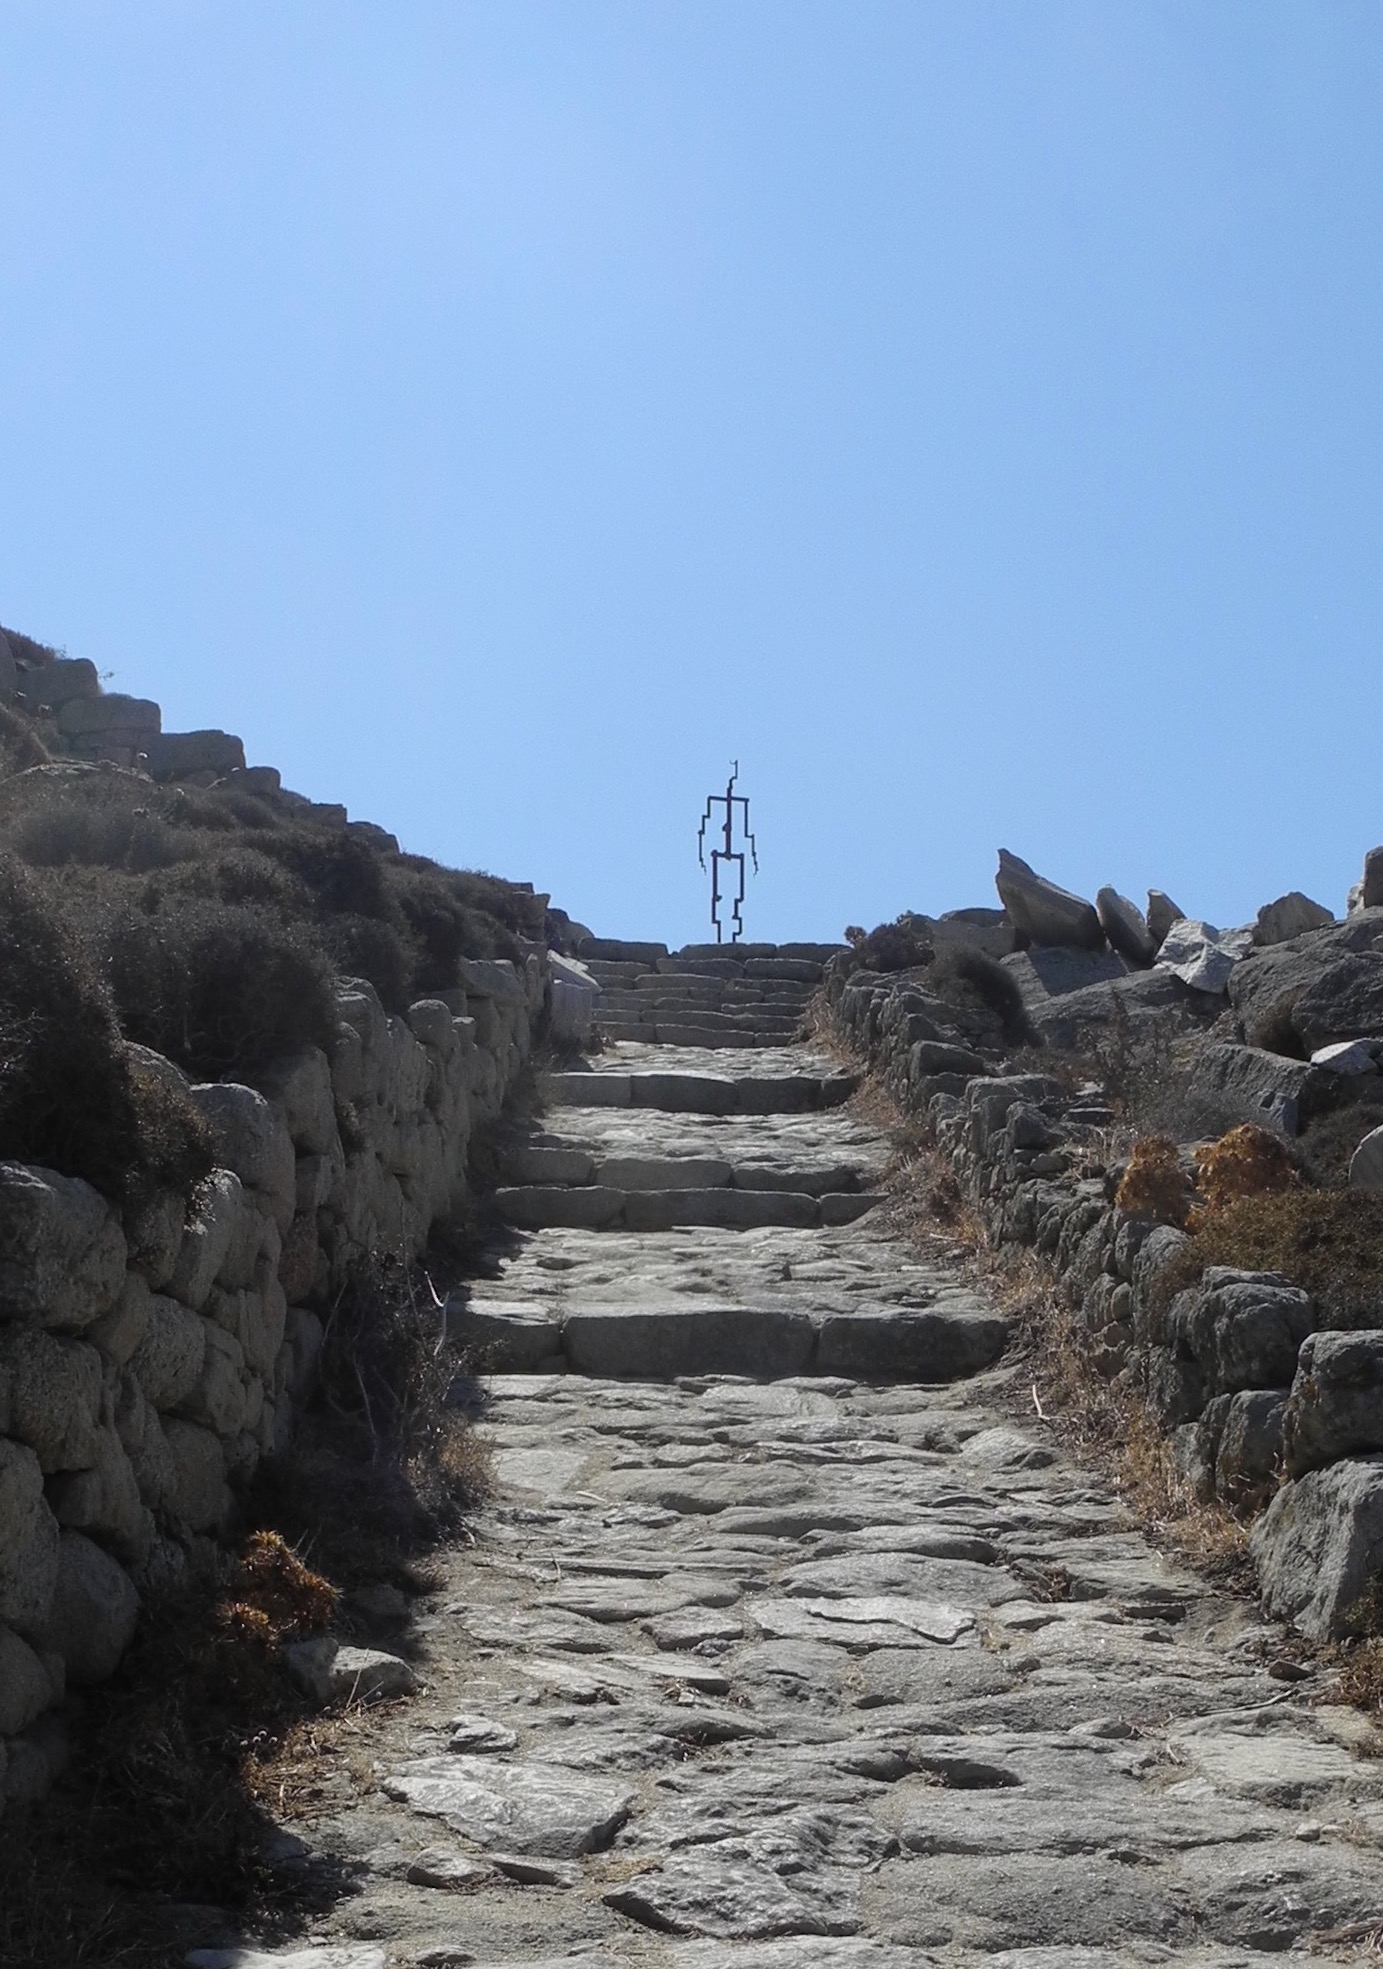 Signal II (2018), site-specific installation at the top of the ancient path ascending Mt Kynthos, Delos